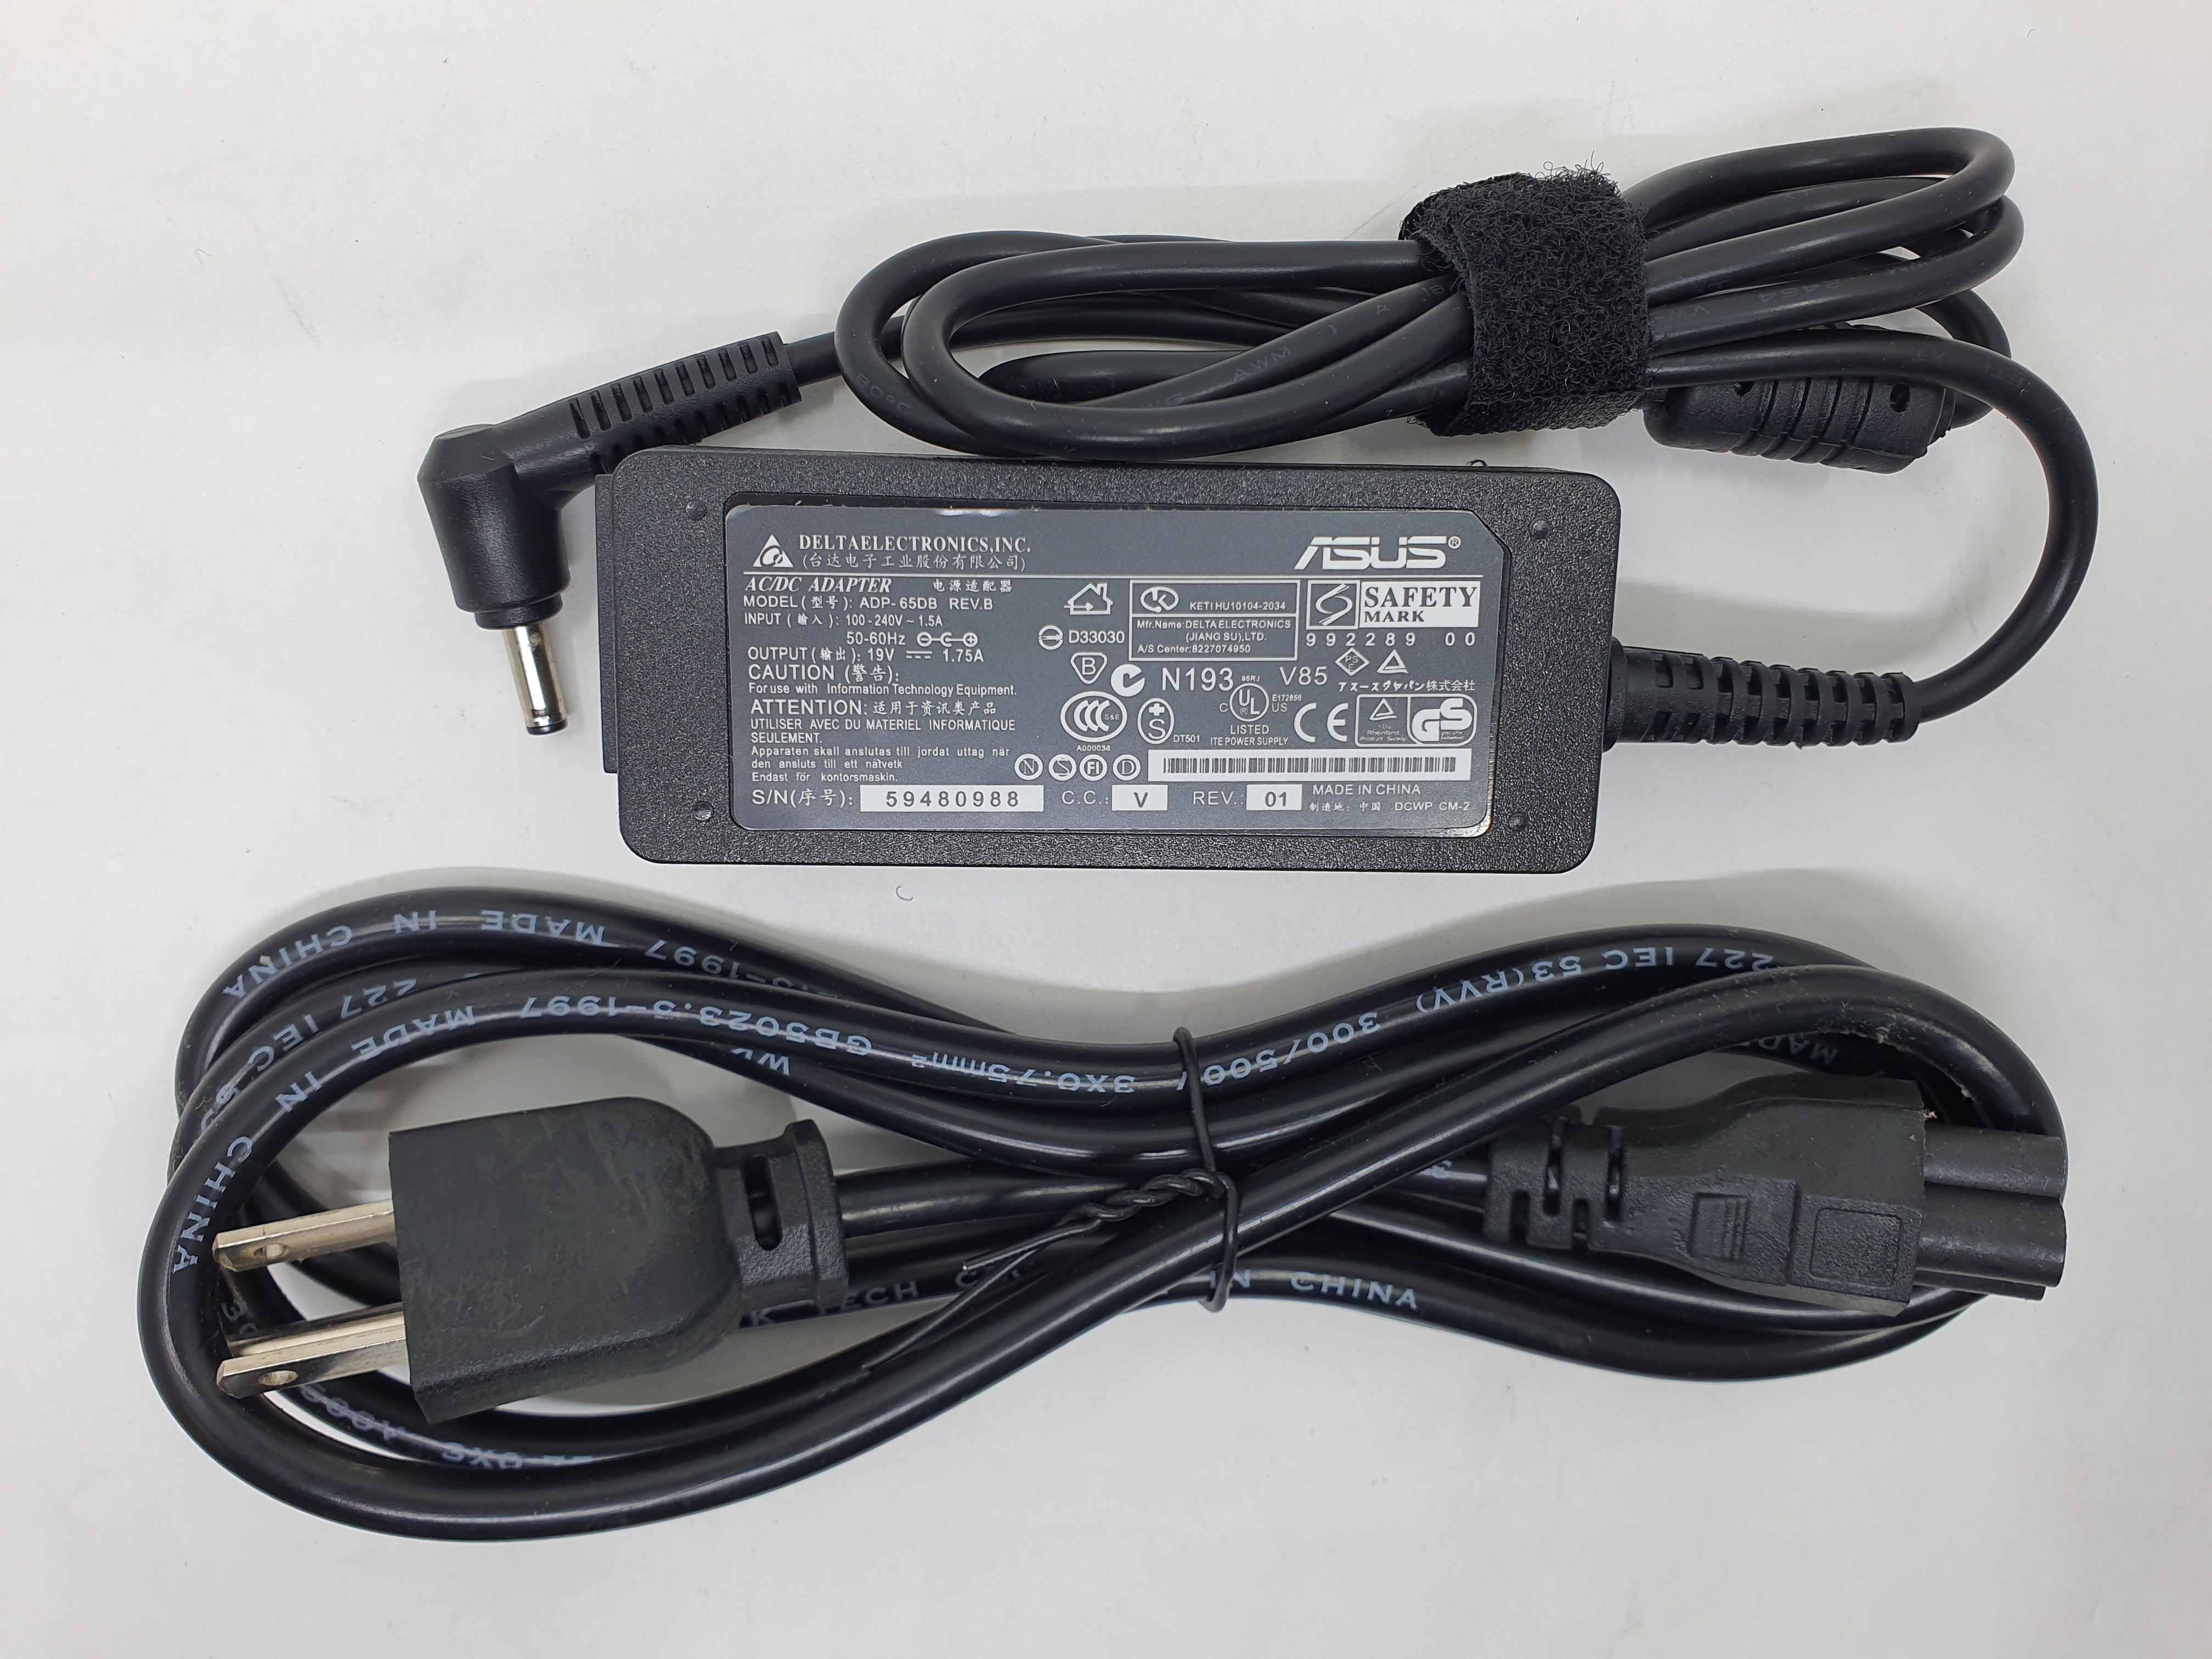 Asus Adapter 45W 19V 4.0 X 1.7 RP A1